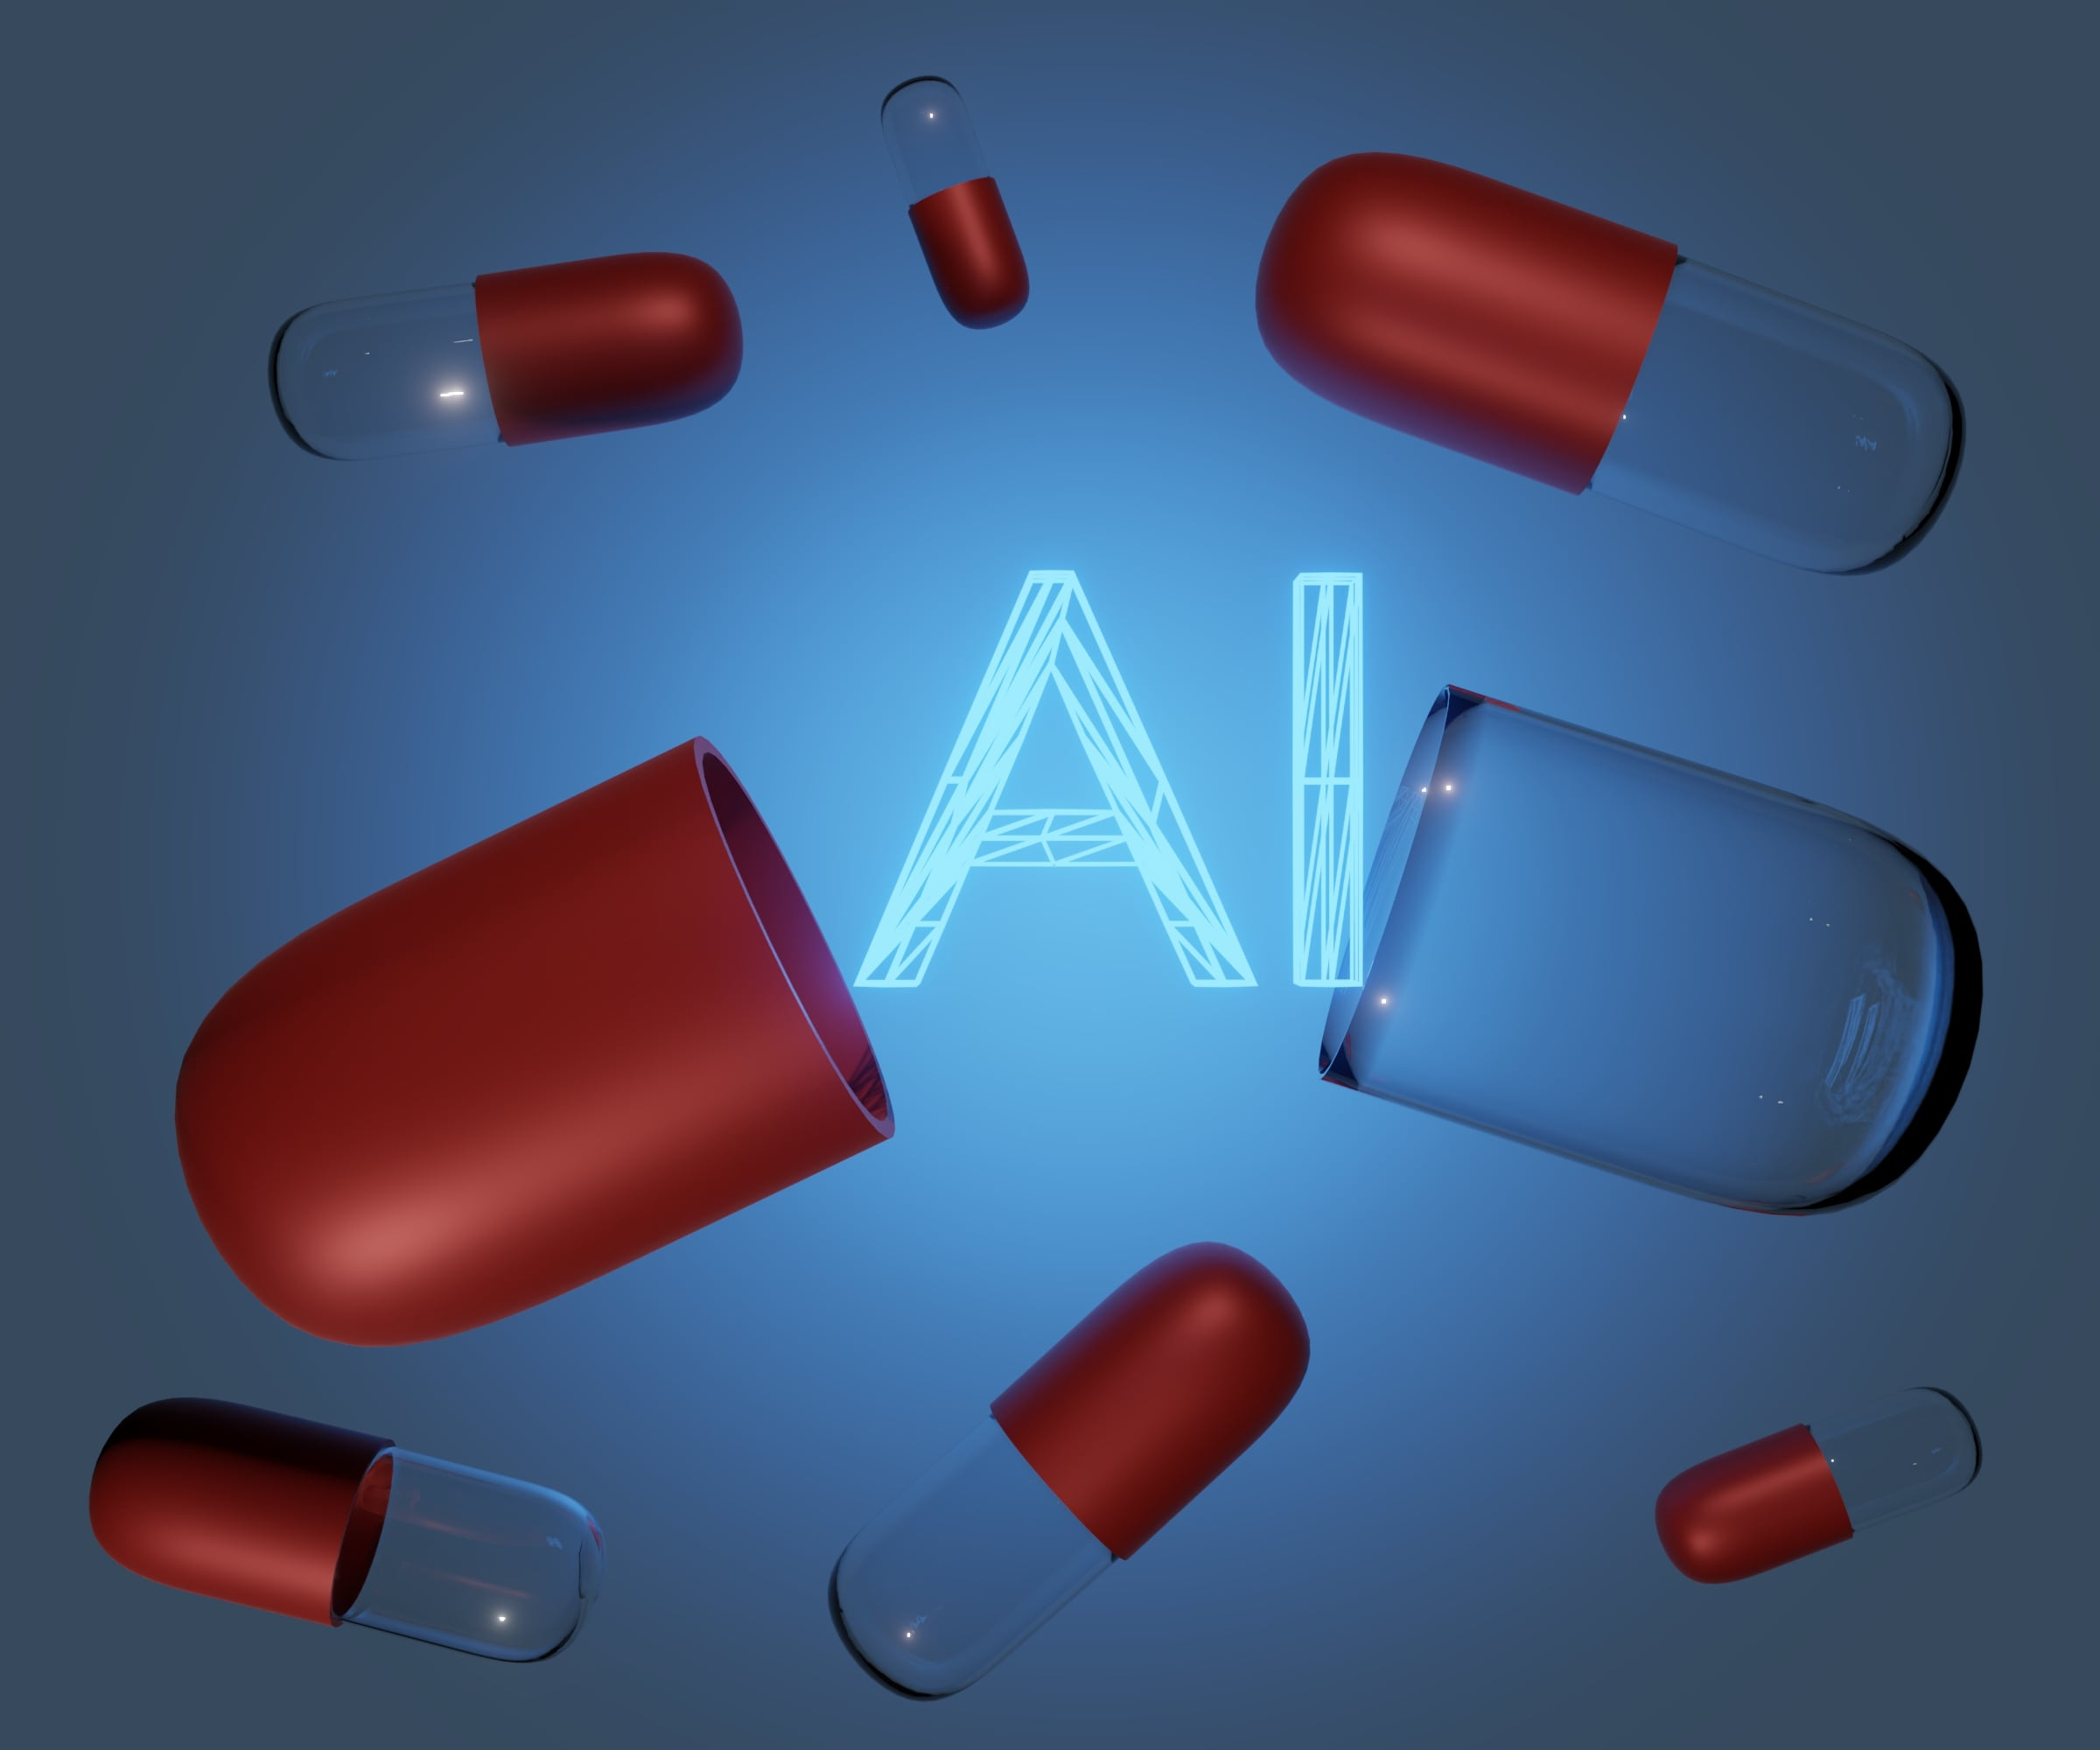 AI or Artificial intelligence is being used to develop new drugs